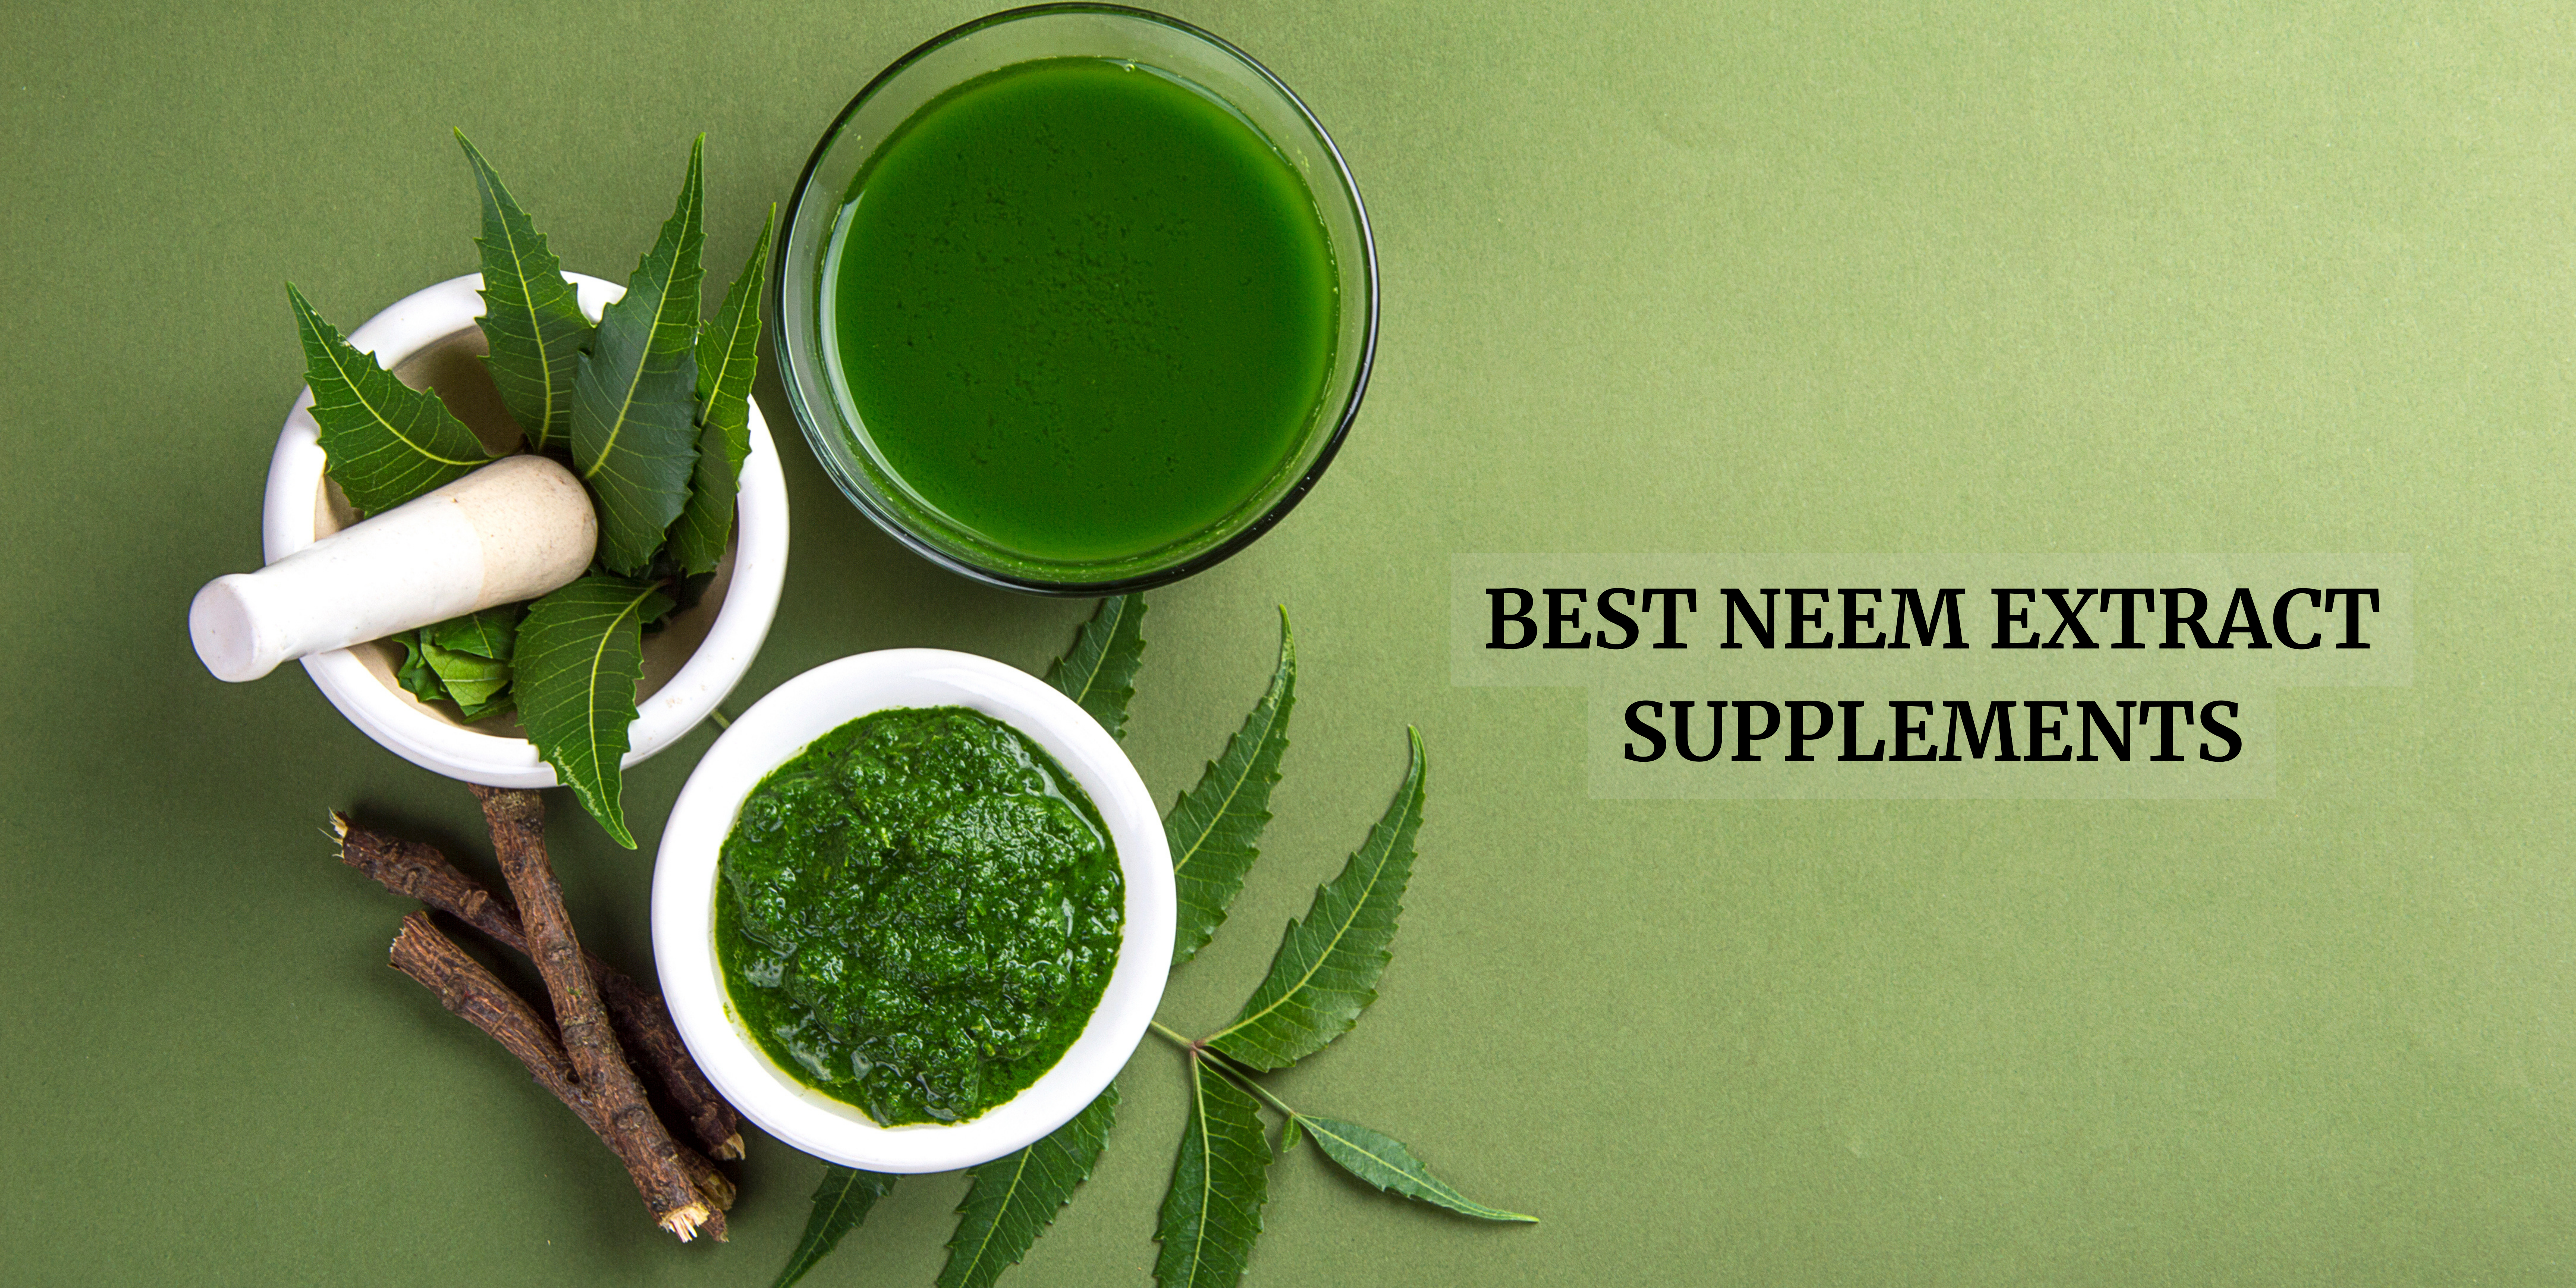 neem extract supplements in USA